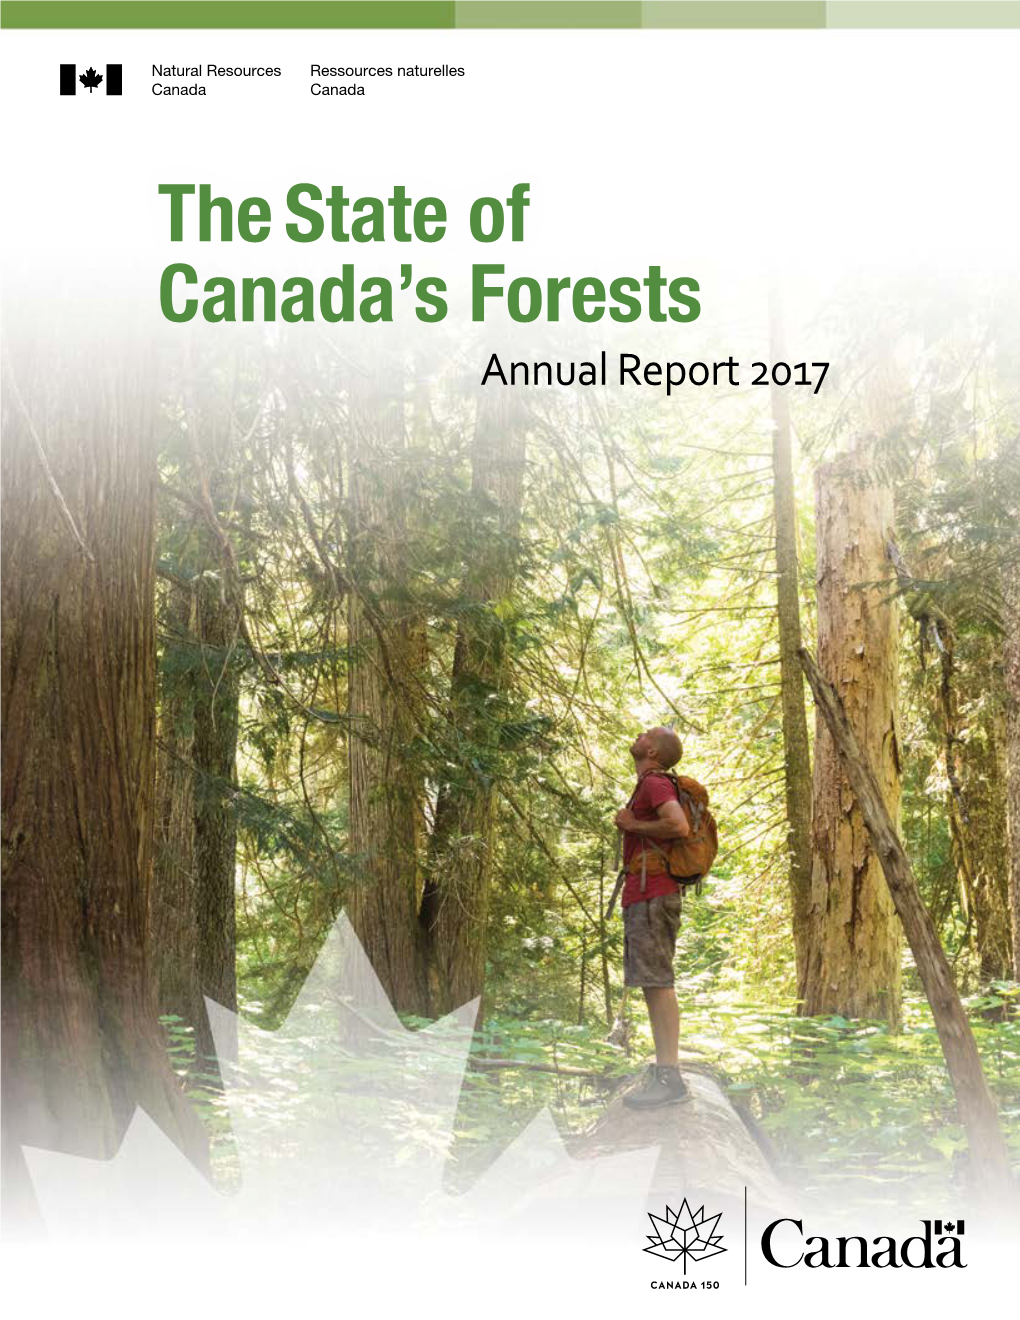 The State of Canada's Forests – Annual Report 2017